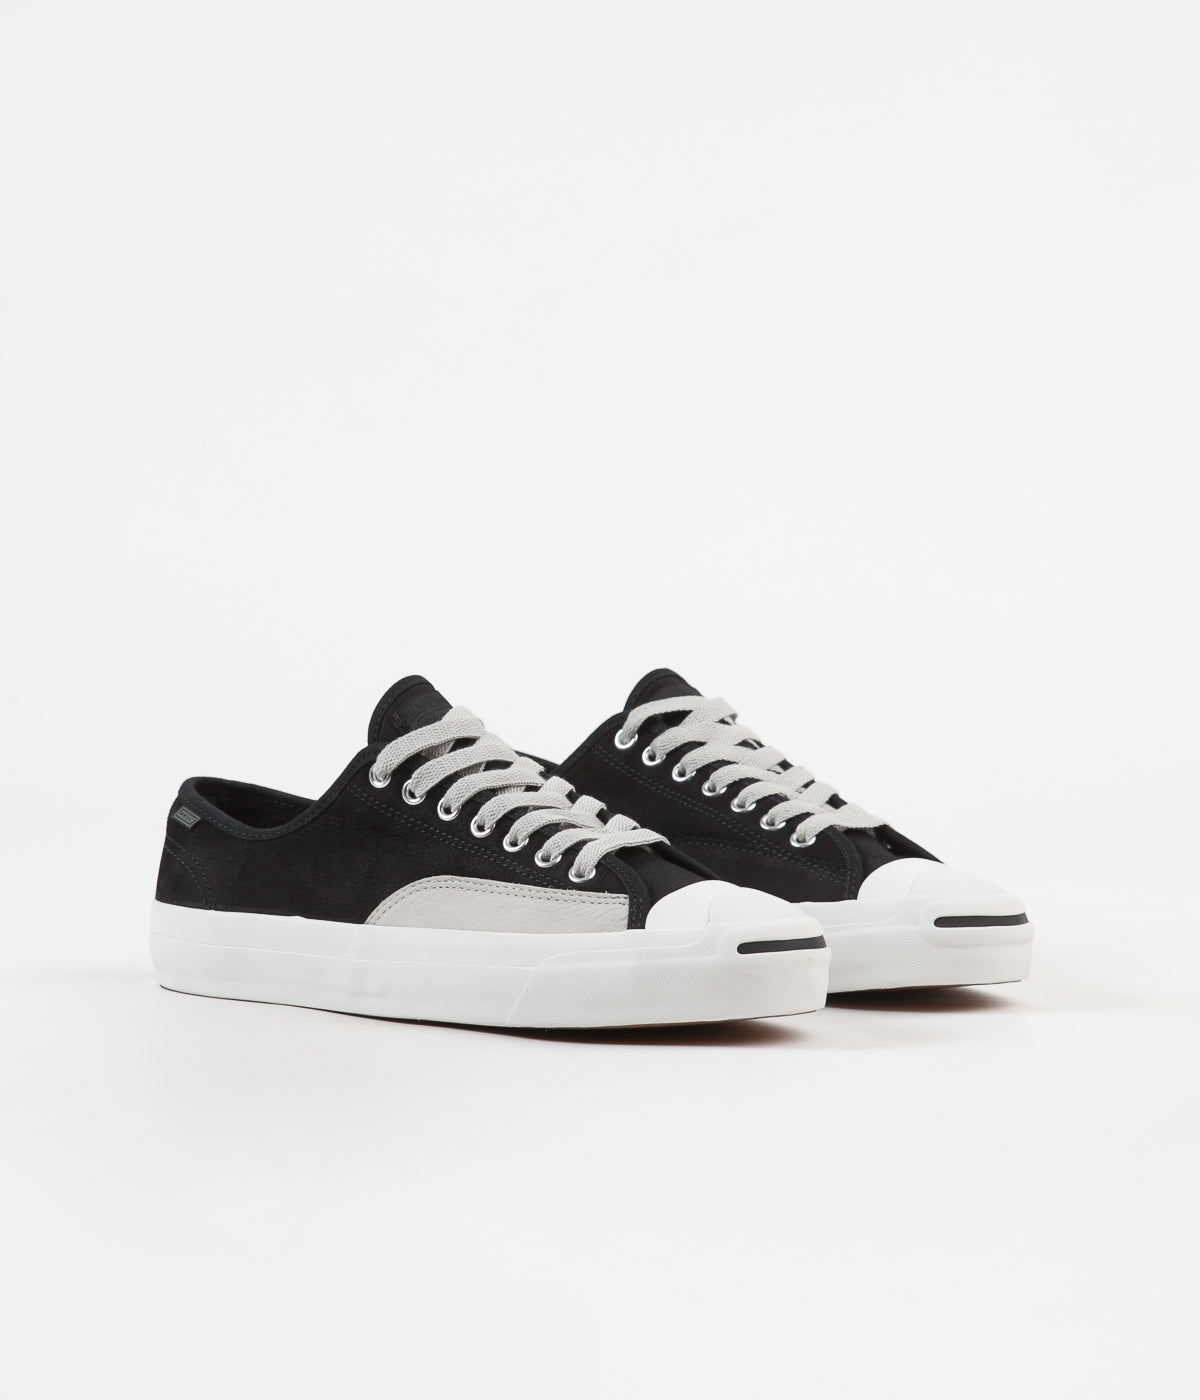 jack purcell pro ox